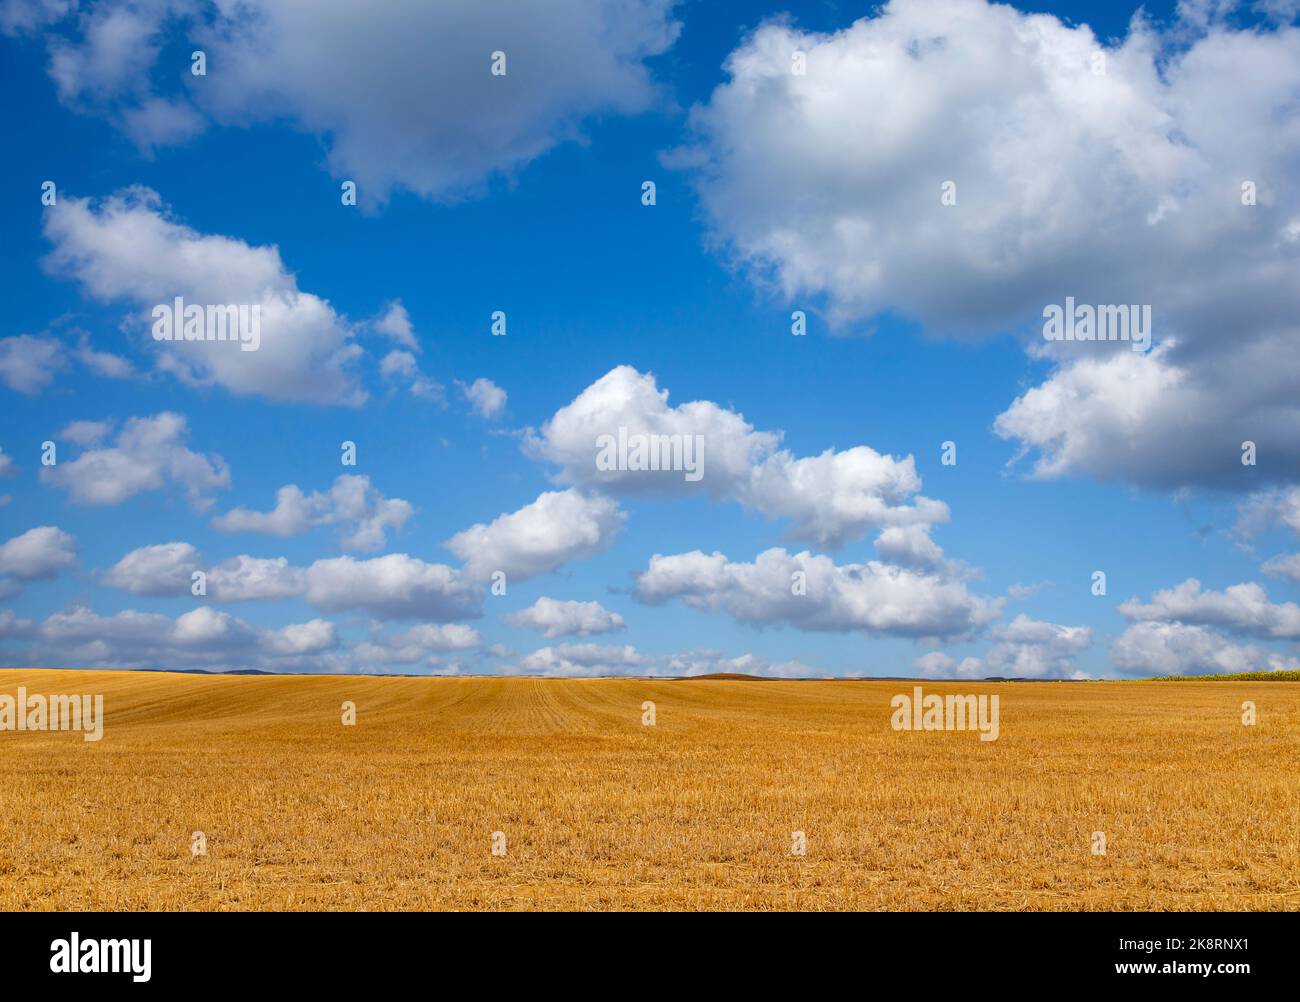 view of a crop field in the north of Spain Stock Photo